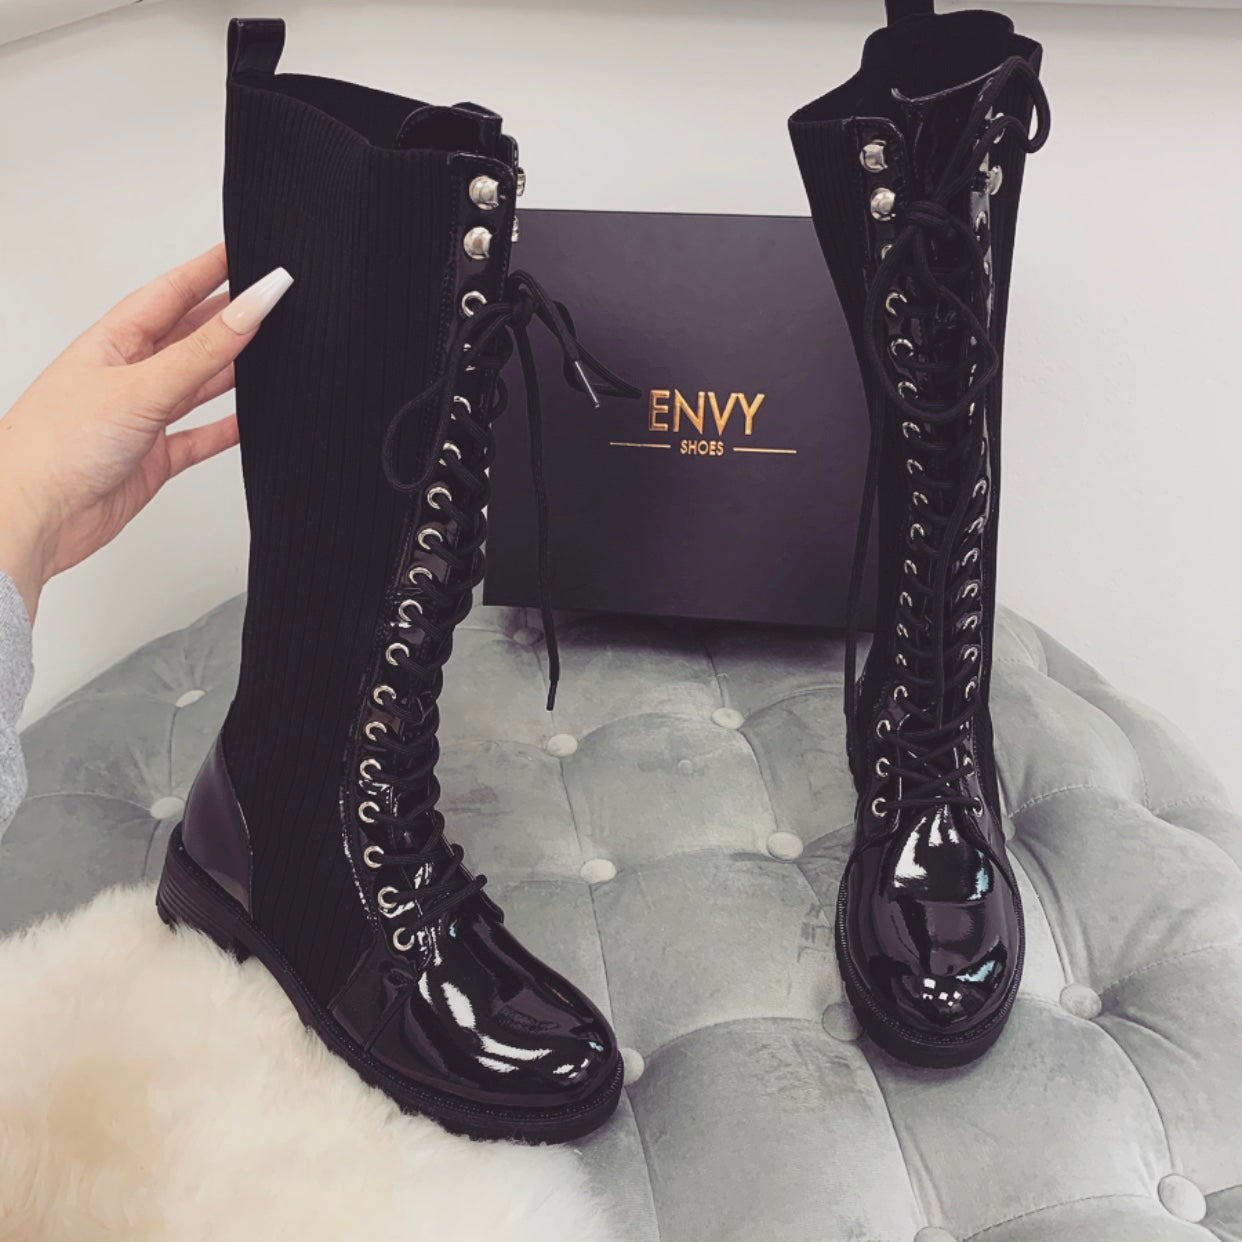 DENIKA KNEE HIGH LACE UP BOOTS – Envy 